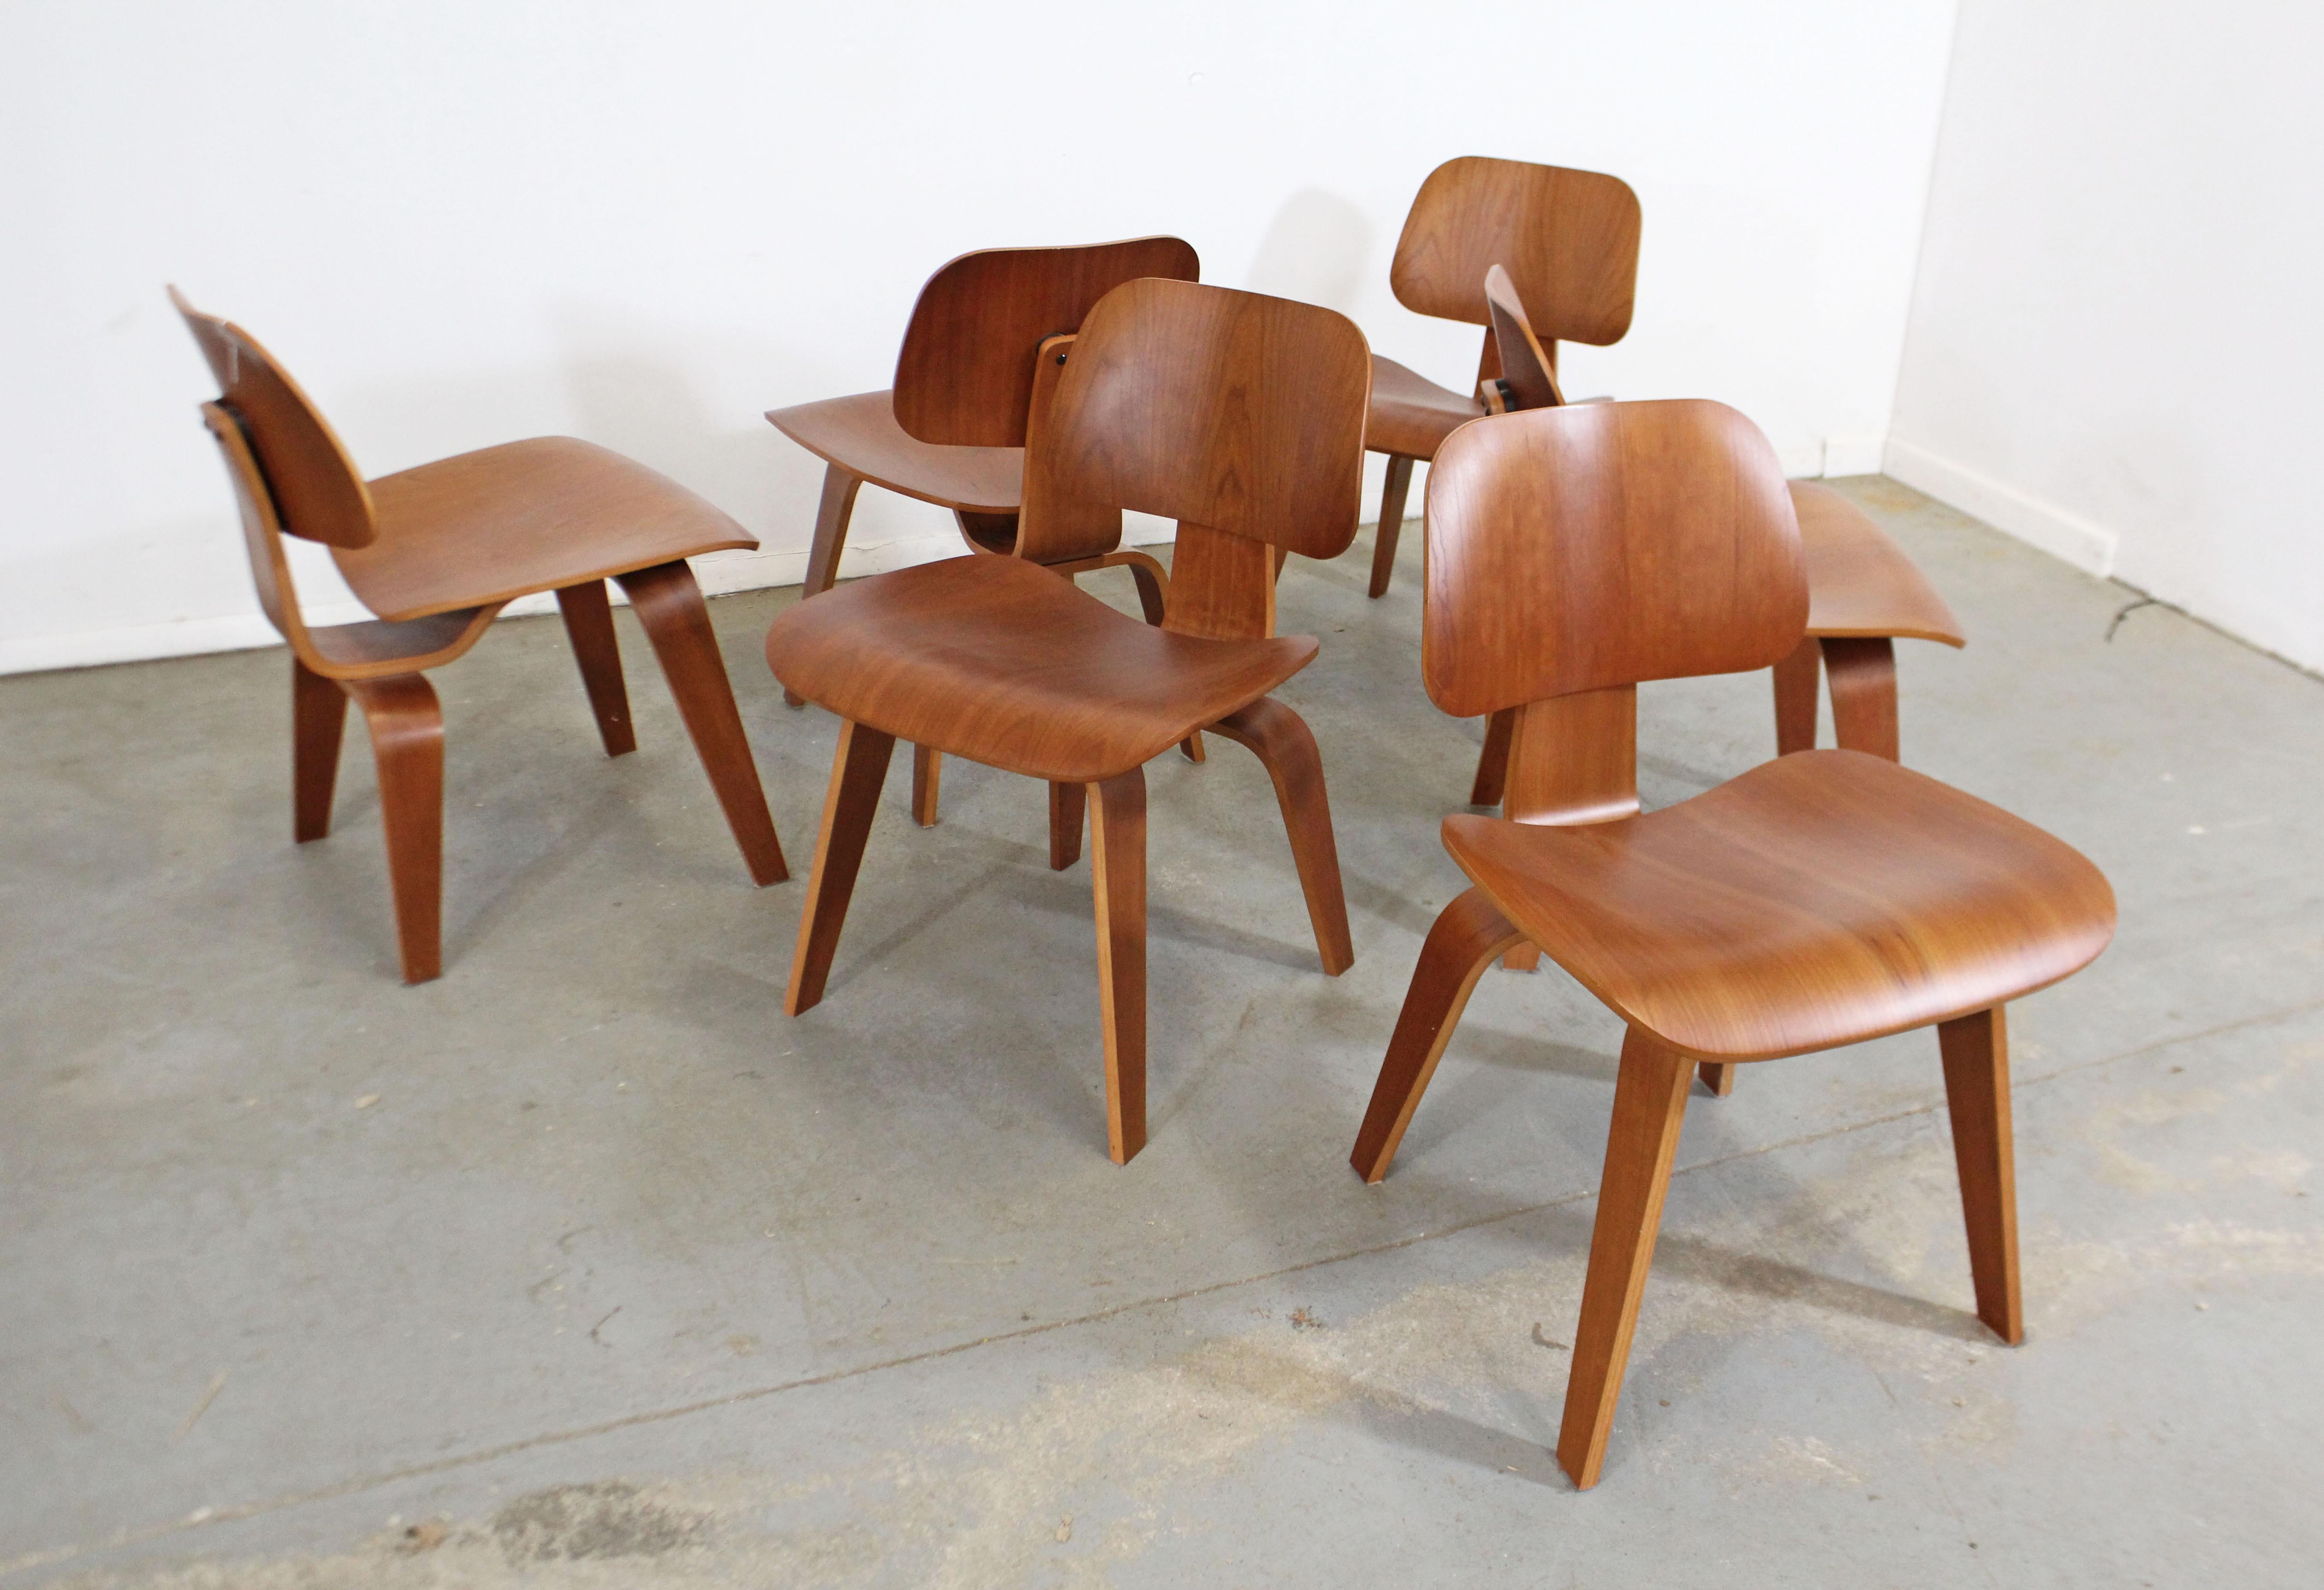 What a find. Offered is a very cool set of six Mid-Century Modern dining chairs, designed by Eames for Herman Miller. These chairs are made of molded plywood in a natural cherry finish. Expertly crafted with a molded seat and back, this chair